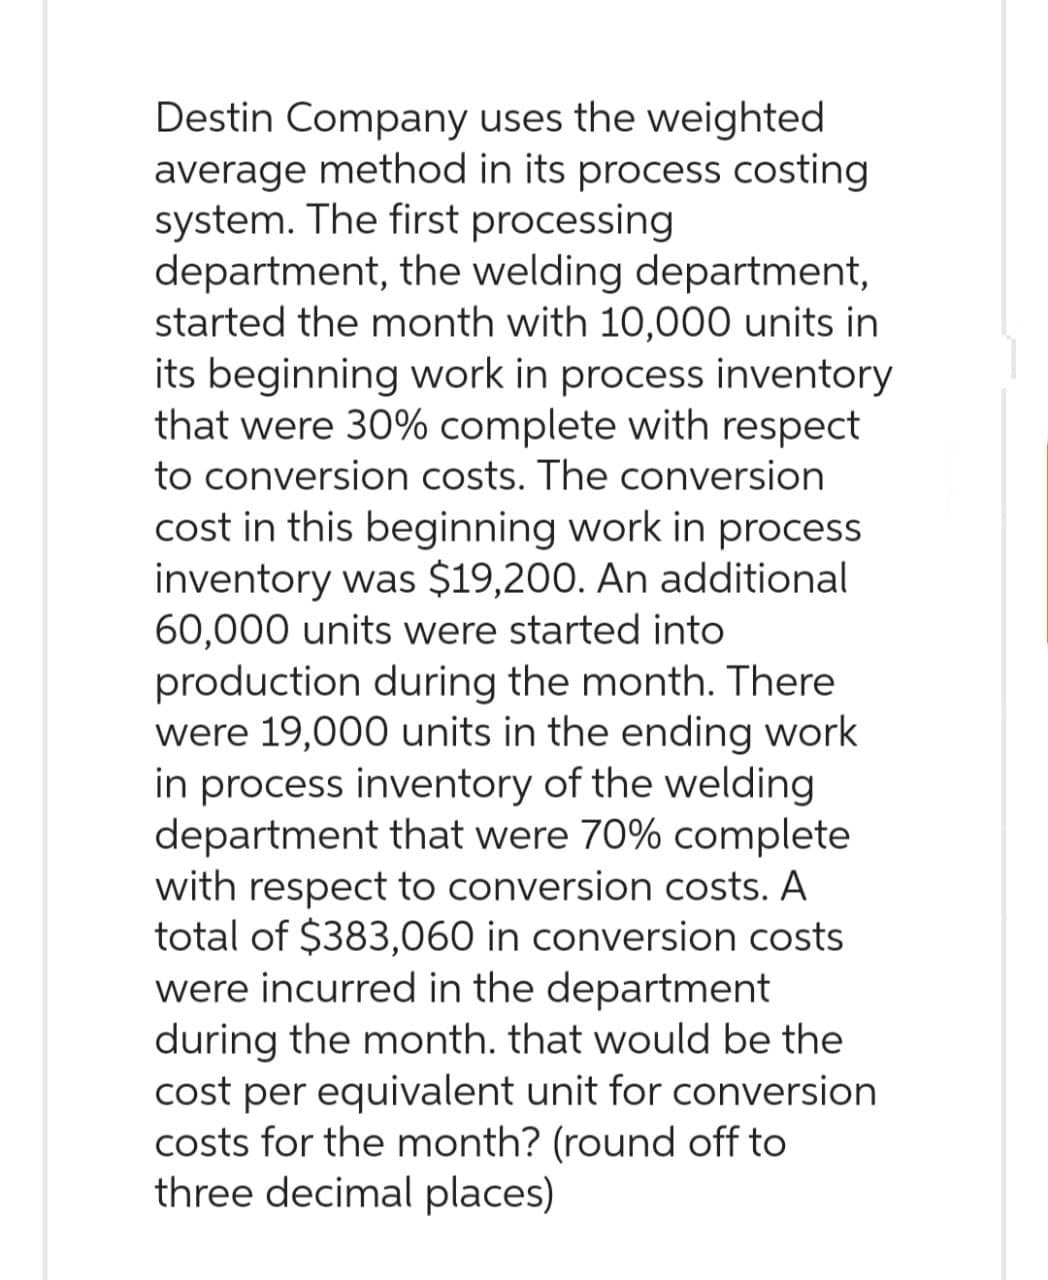 Destin Company uses the weighted
average method in its process costing
system. The first processing
department, the welding department,
started the month with 10,000 units in
its beginning work in process inventory
that were 30% complete with respect
to conversion costs. The conversion
cost in this beginning work in process
inventory was $19,200. An additional
60,000 units were started into
production during the month. There
were 19,000 units in the ending work
in process inventory of the welding
department that were 70% complete
with respect to conversion costs. A
total of $383,060 in conversion costs
were incurred in the department
during the month. that would be the
cost per equivalent unit for conversion
costs for the month? (round off to
three decimal places)